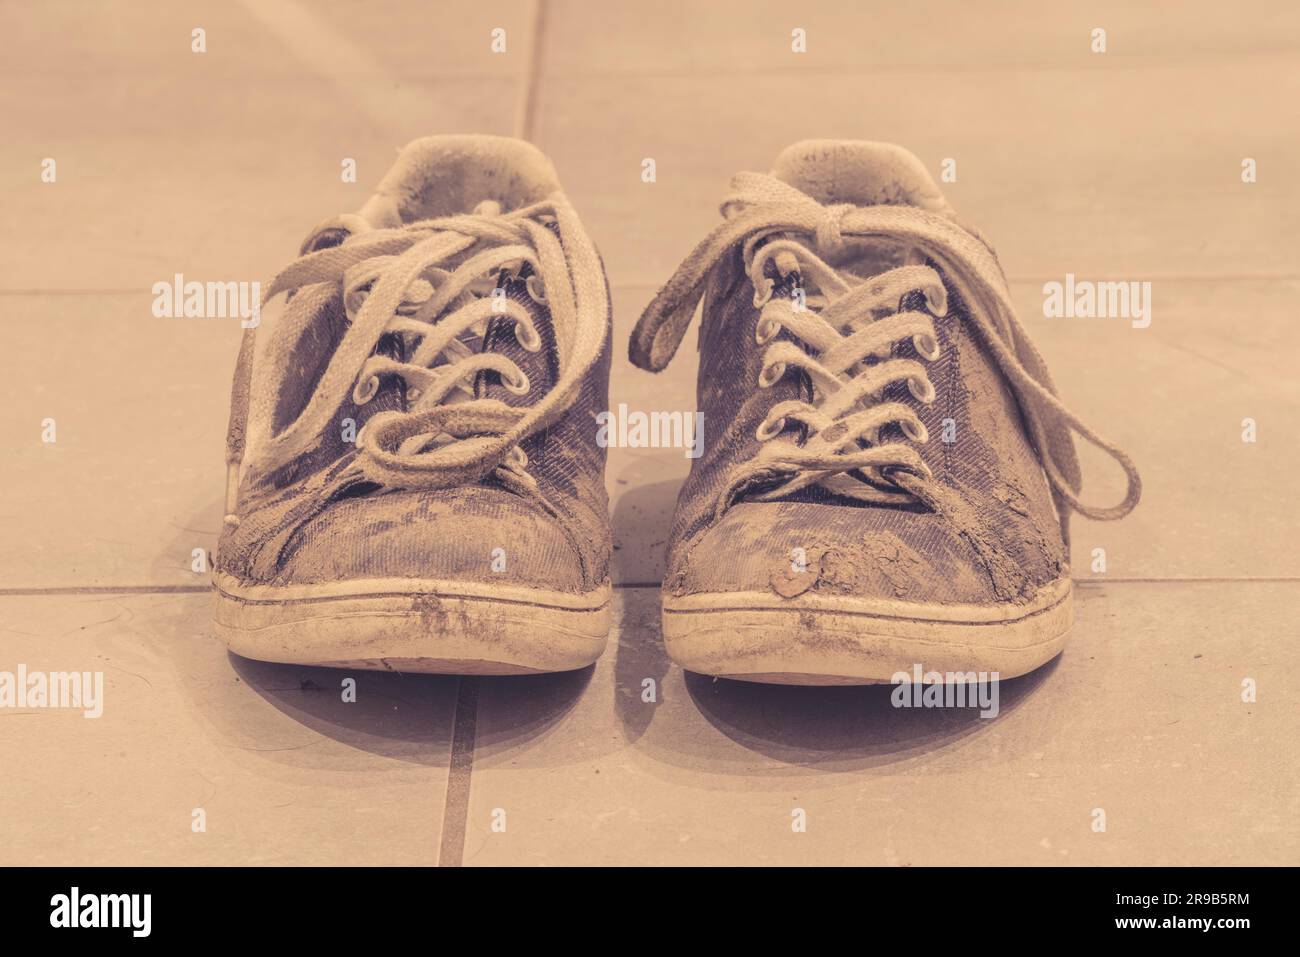 Muddy sneaker shoes with laces in sepia color Stock Photo